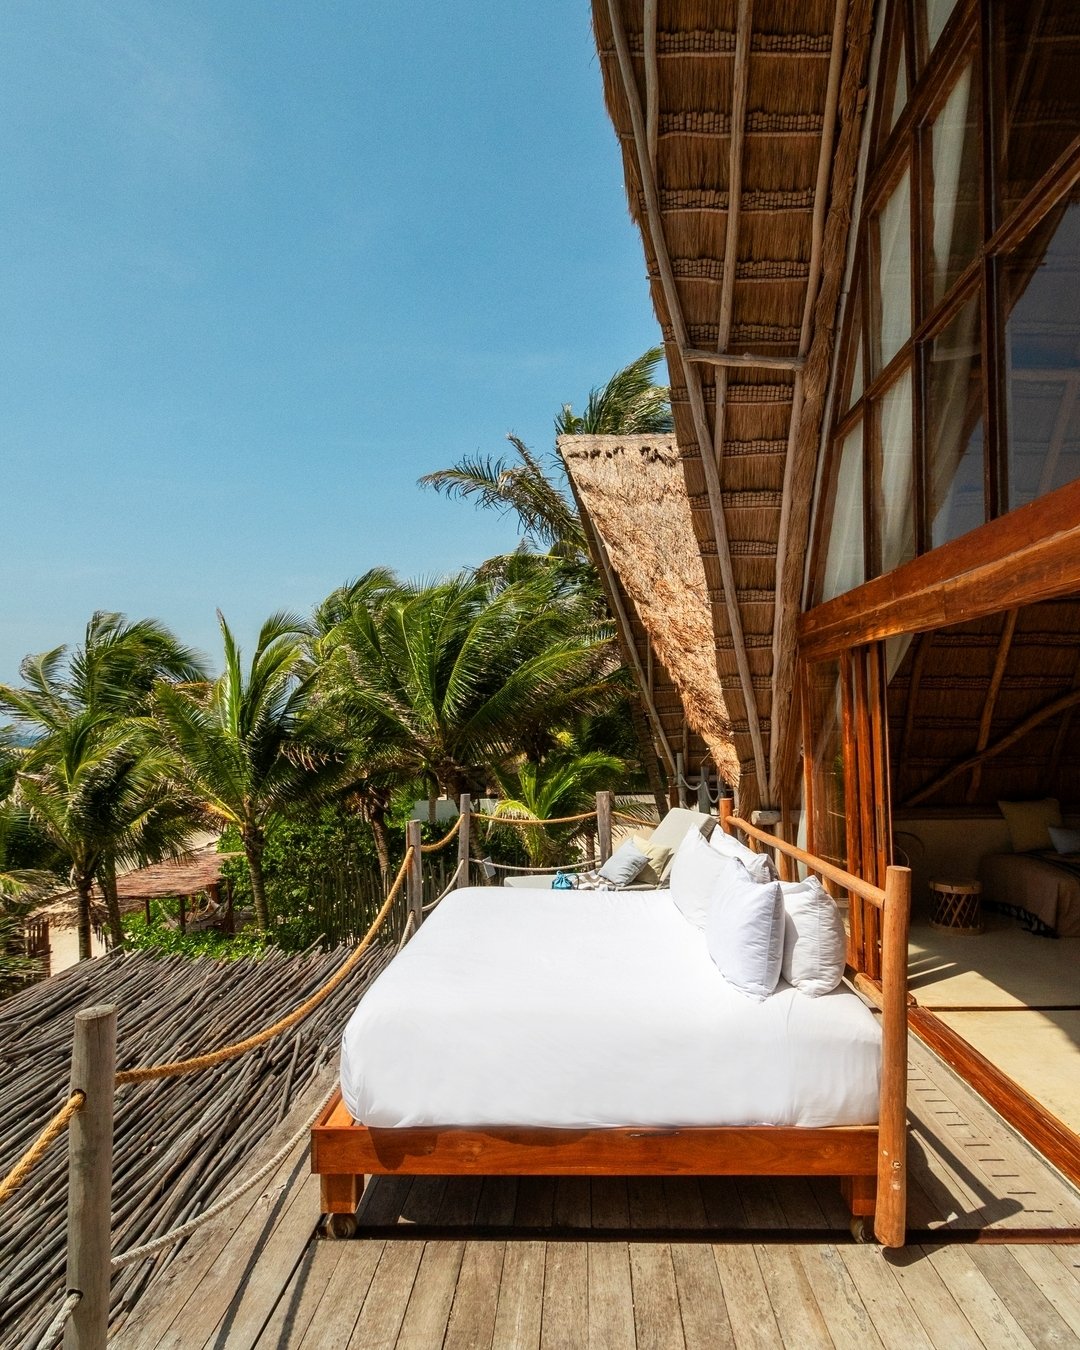 Where else can you do this? Within a whim, slide your bed out from your beachfront bedroom onto the balcony.

&iquest;D&oacute;nde m&aacute;s puedes hacer esto? Con un simple capricho, desliza tu cama desde tu habitaci&oacute;n frente al mar hacia el